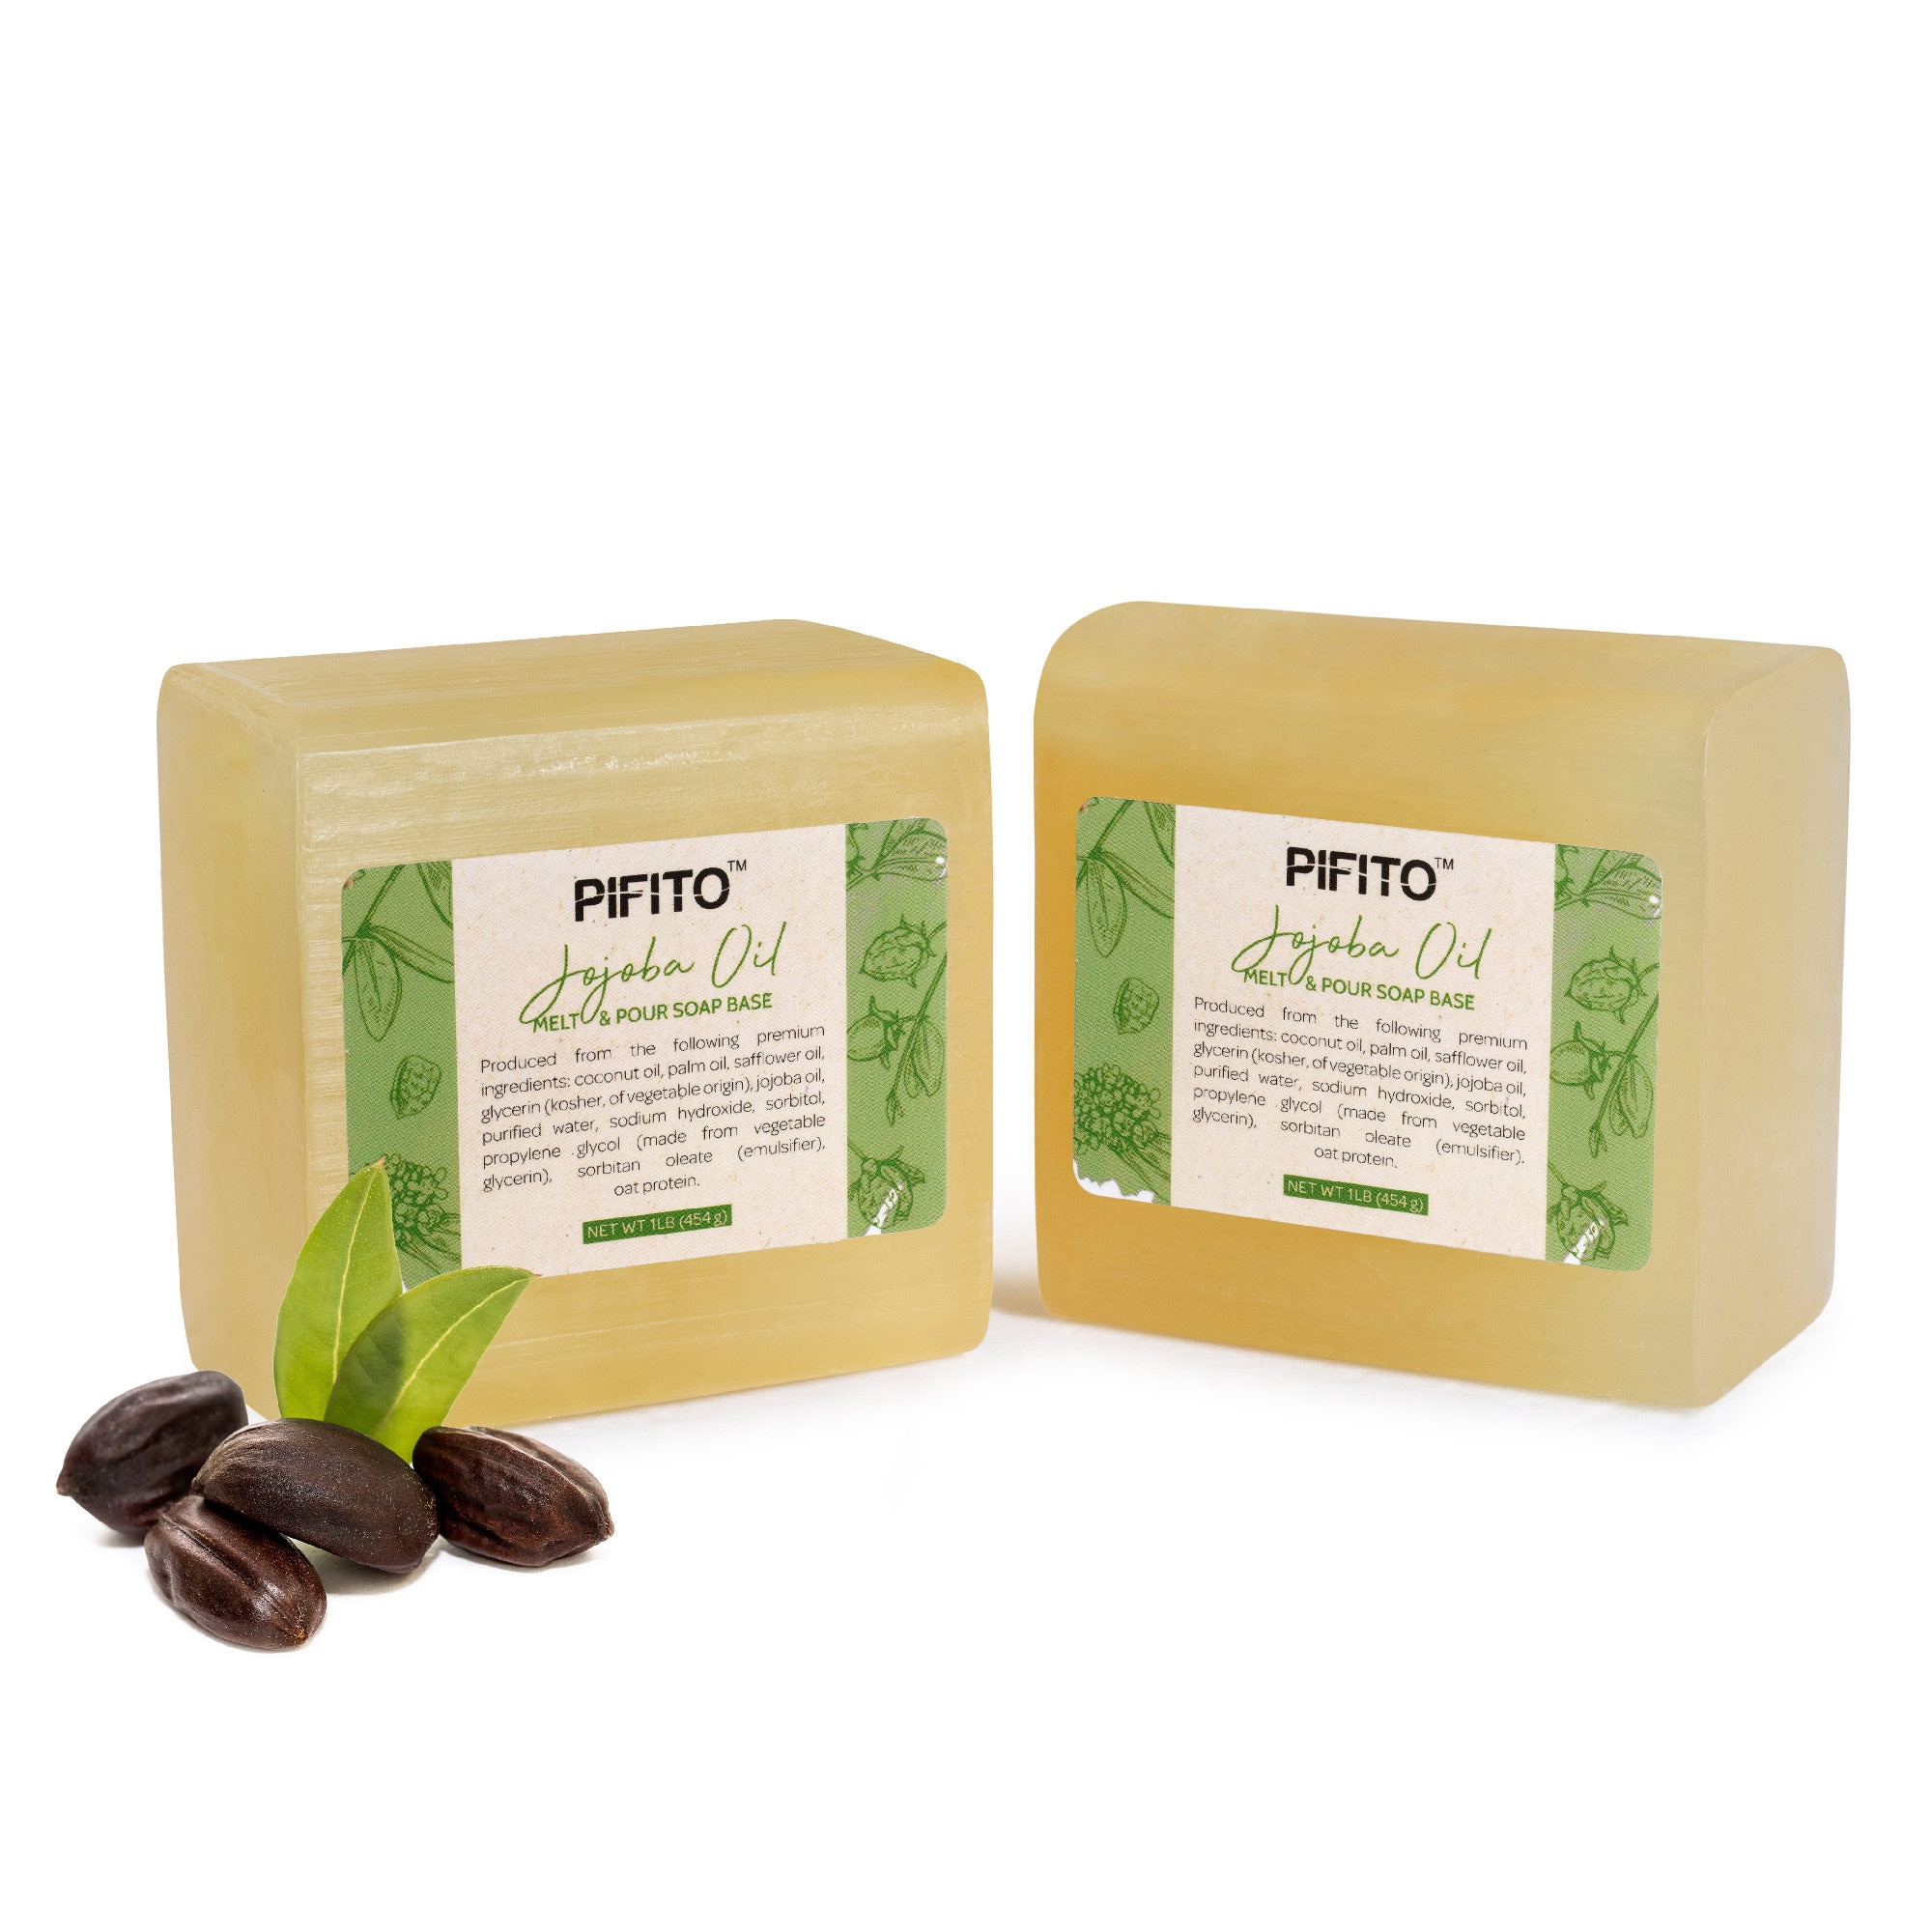 Pifito Sweet Almond Oil Melt and Pour Soap Base (5 lb) - Luxurious